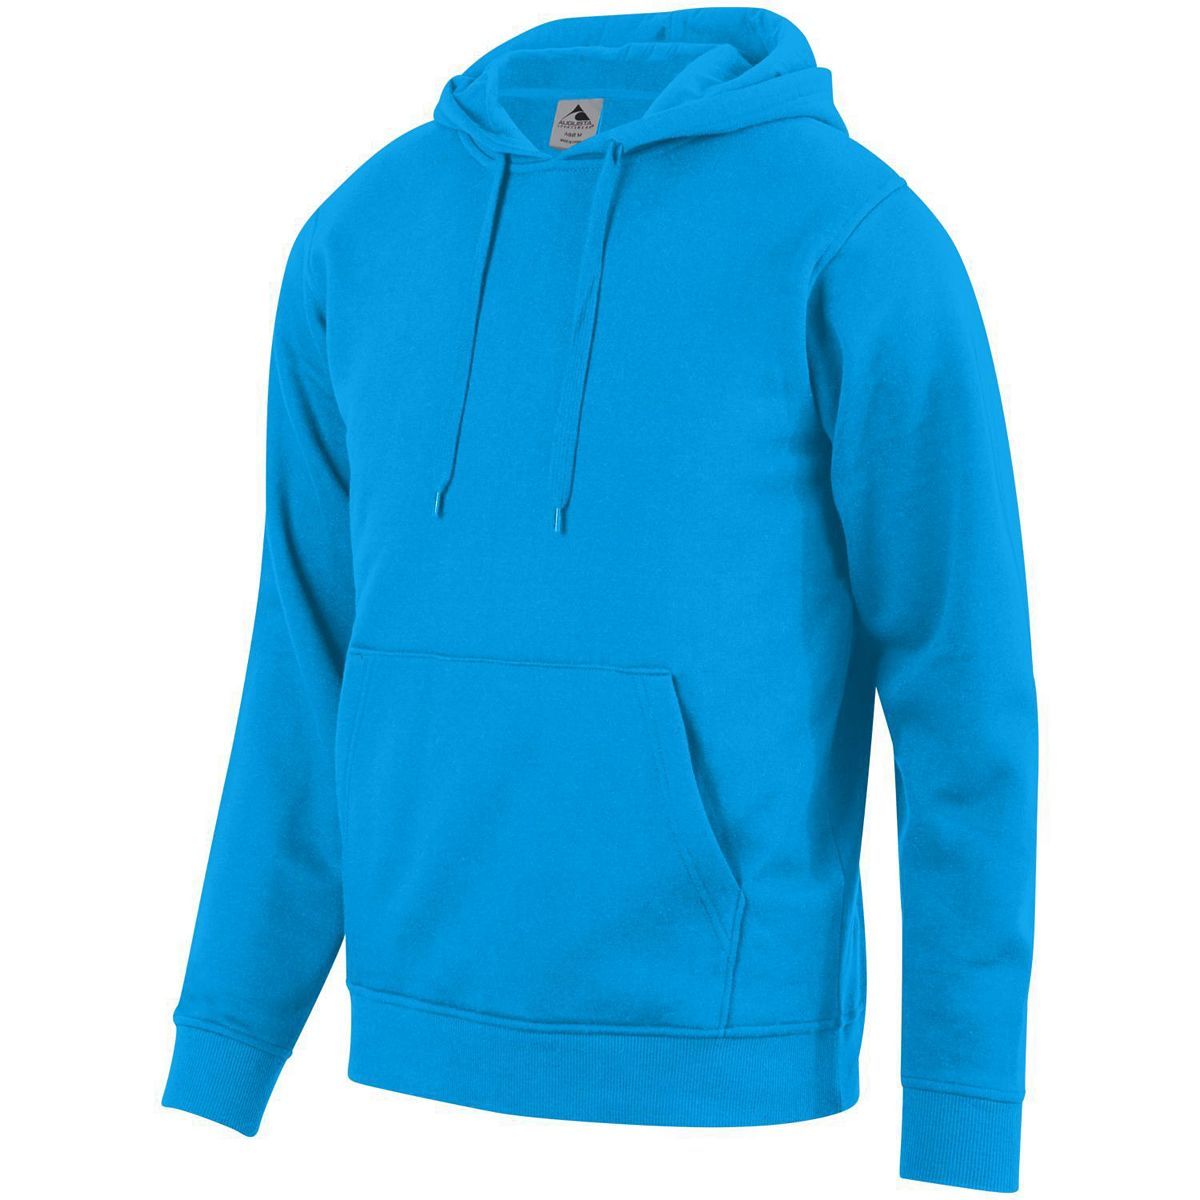 Augusta Sportswear Youth 60/40 Fleece Hoodie in Power Blue  -Part of the Youth, Youth-Hoodie, Hoodies, Augusta-Products product lines at KanaleyCreations.com